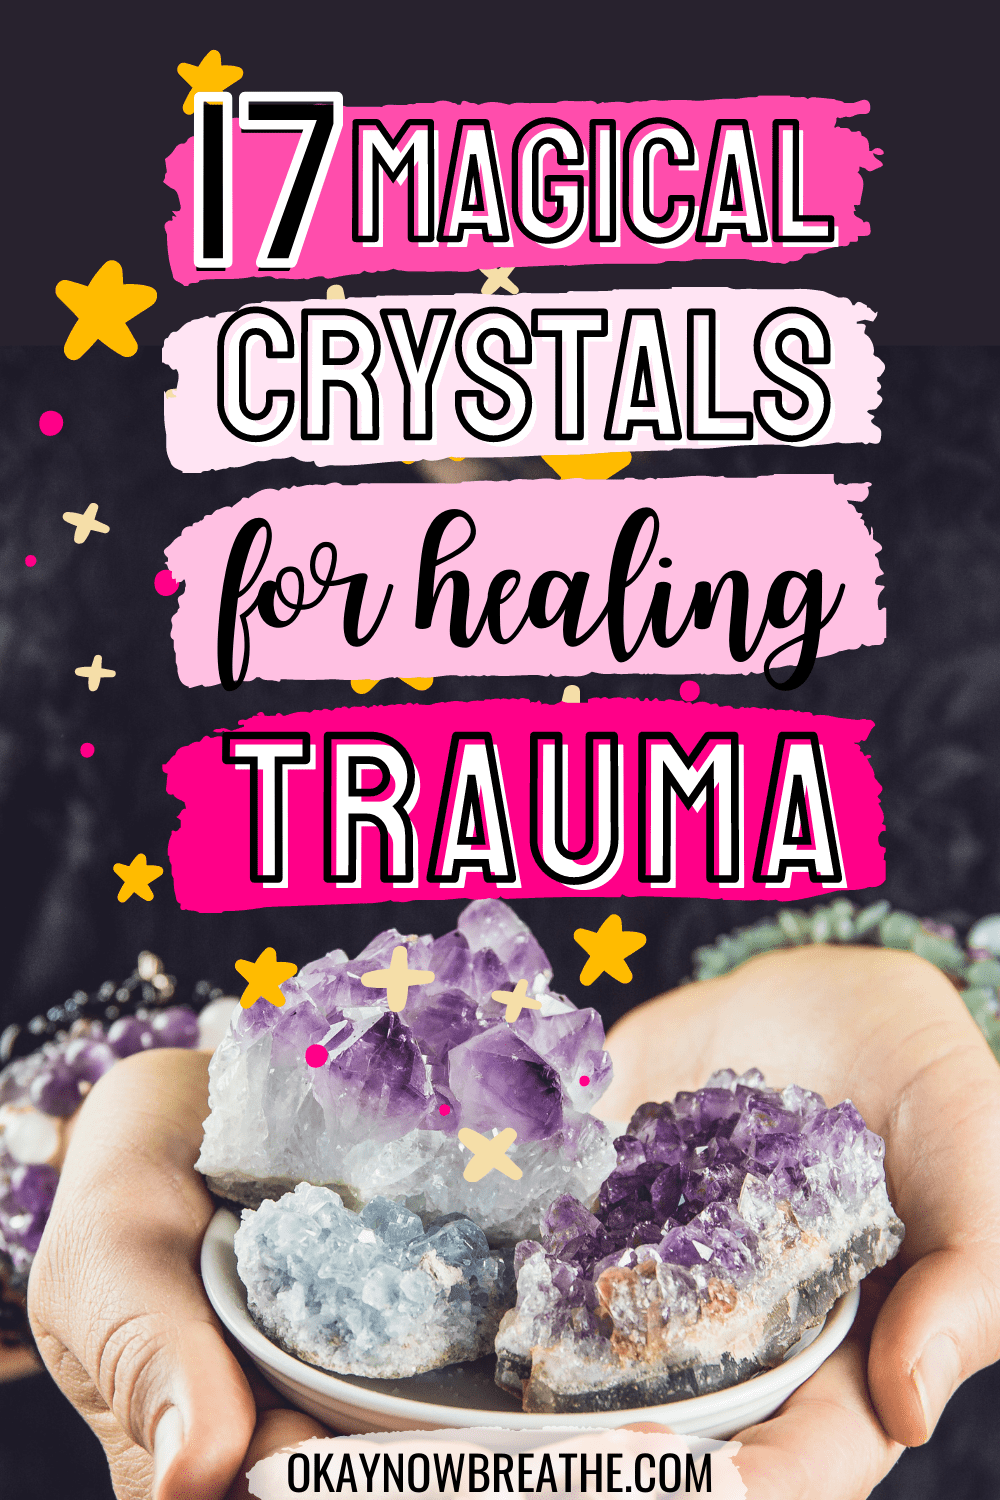 Hands are holding a small white bowl with amethyst cluster crystals. Text overlay says 17 magical crystals for healing trauma - okaynowbreathe.com